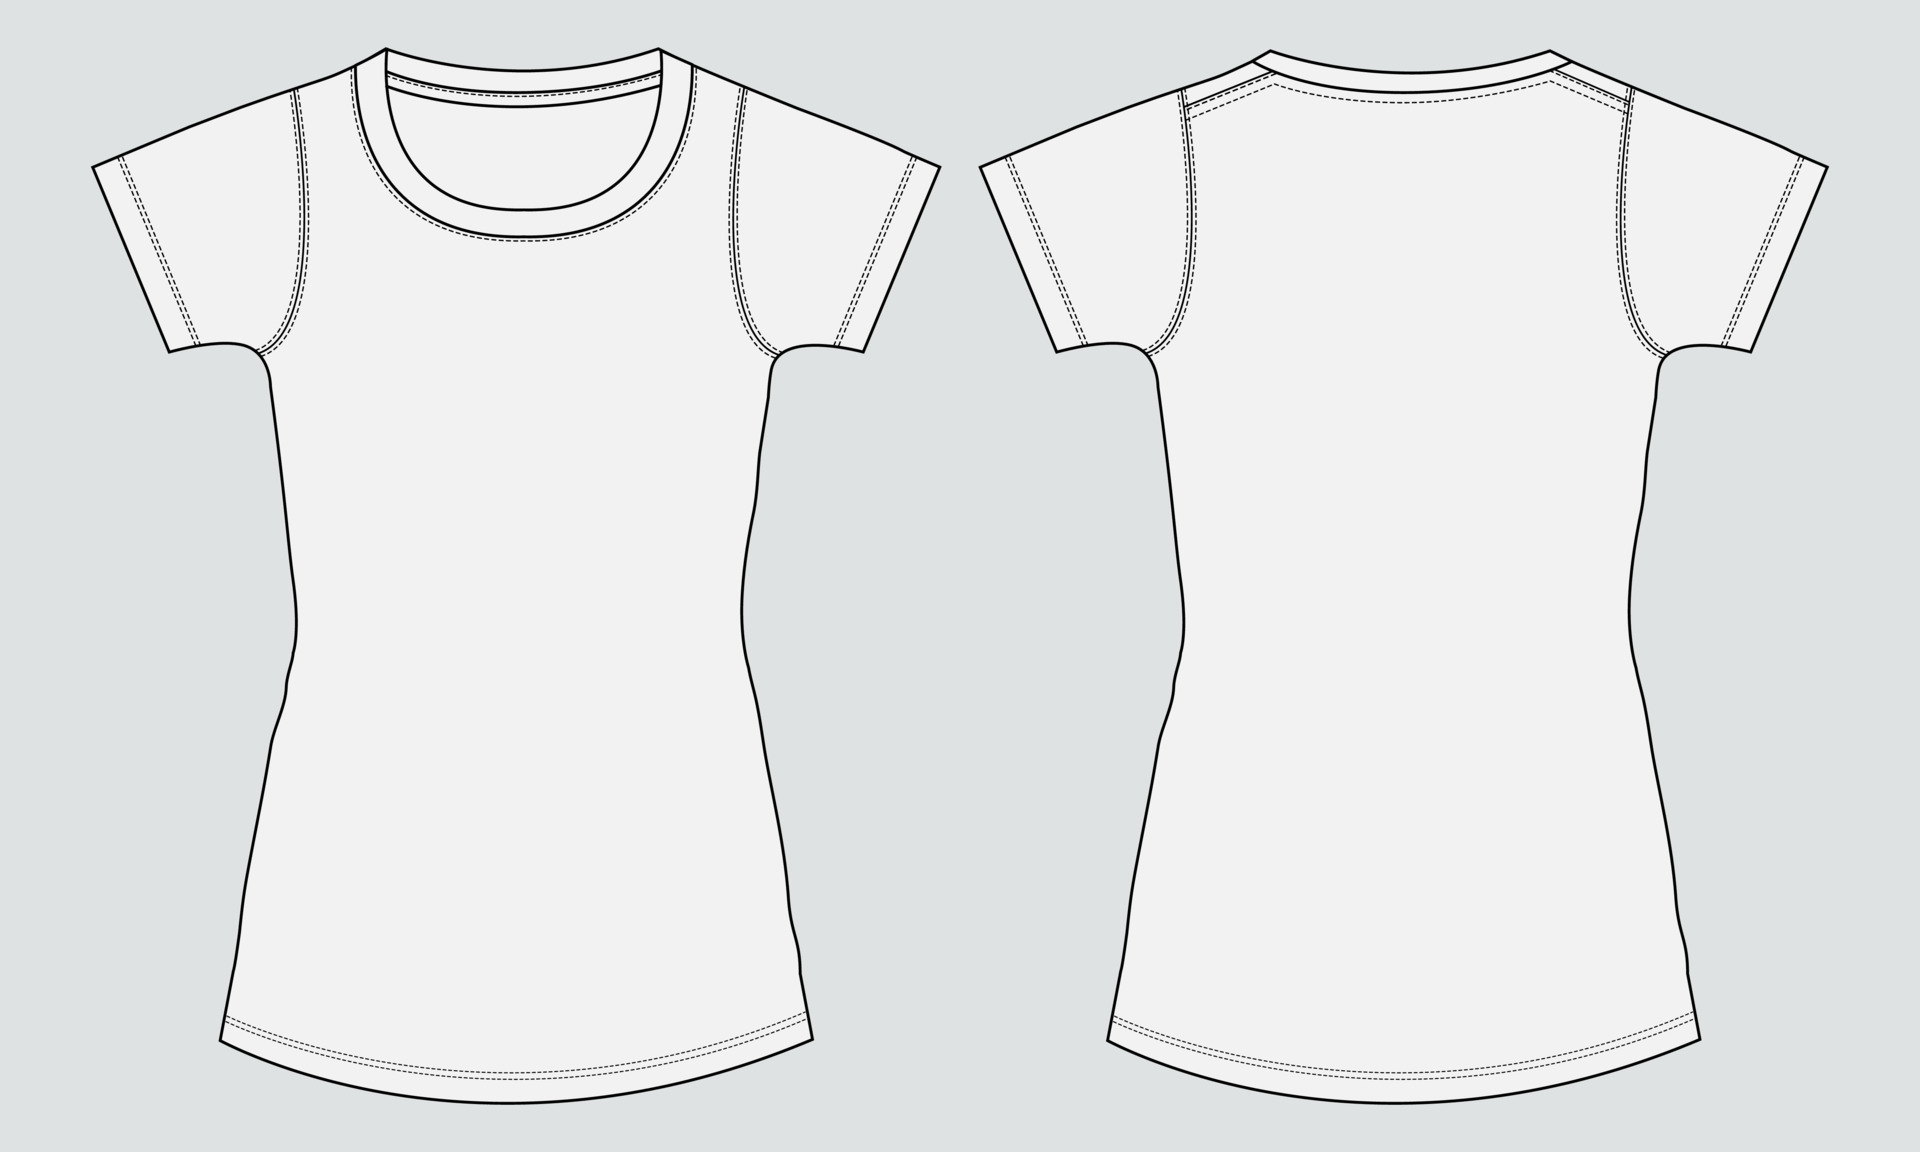 Vector Cropped Top Fashion Cad Women V Neck T Shirt With Knot Technical  Drawing Template Sketch Flat Stock Illustration  Download Image Now   iStock